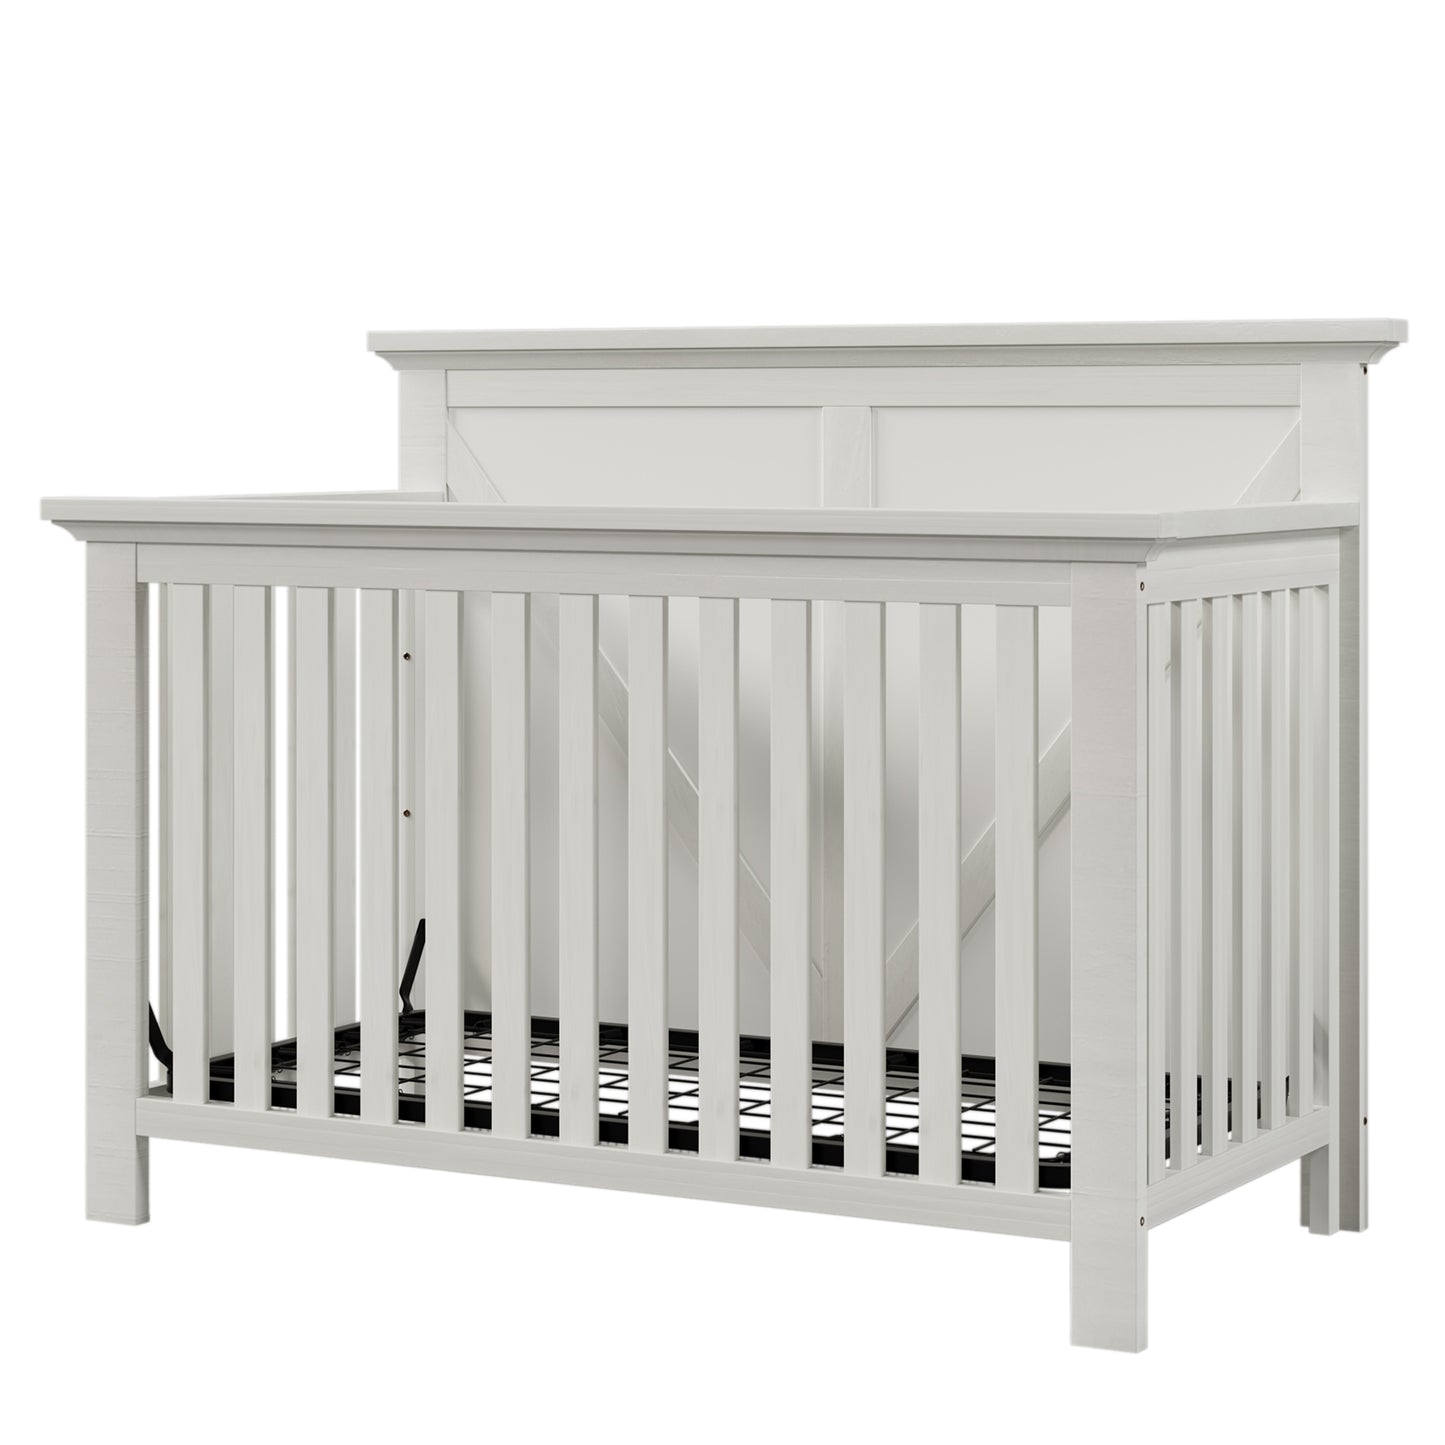 Rustic Farmhouse Style Whitewash 4-in-1 Convertible Baby Crib - Converts to Toddler Bed, Daybed and Full-Size Bed, White